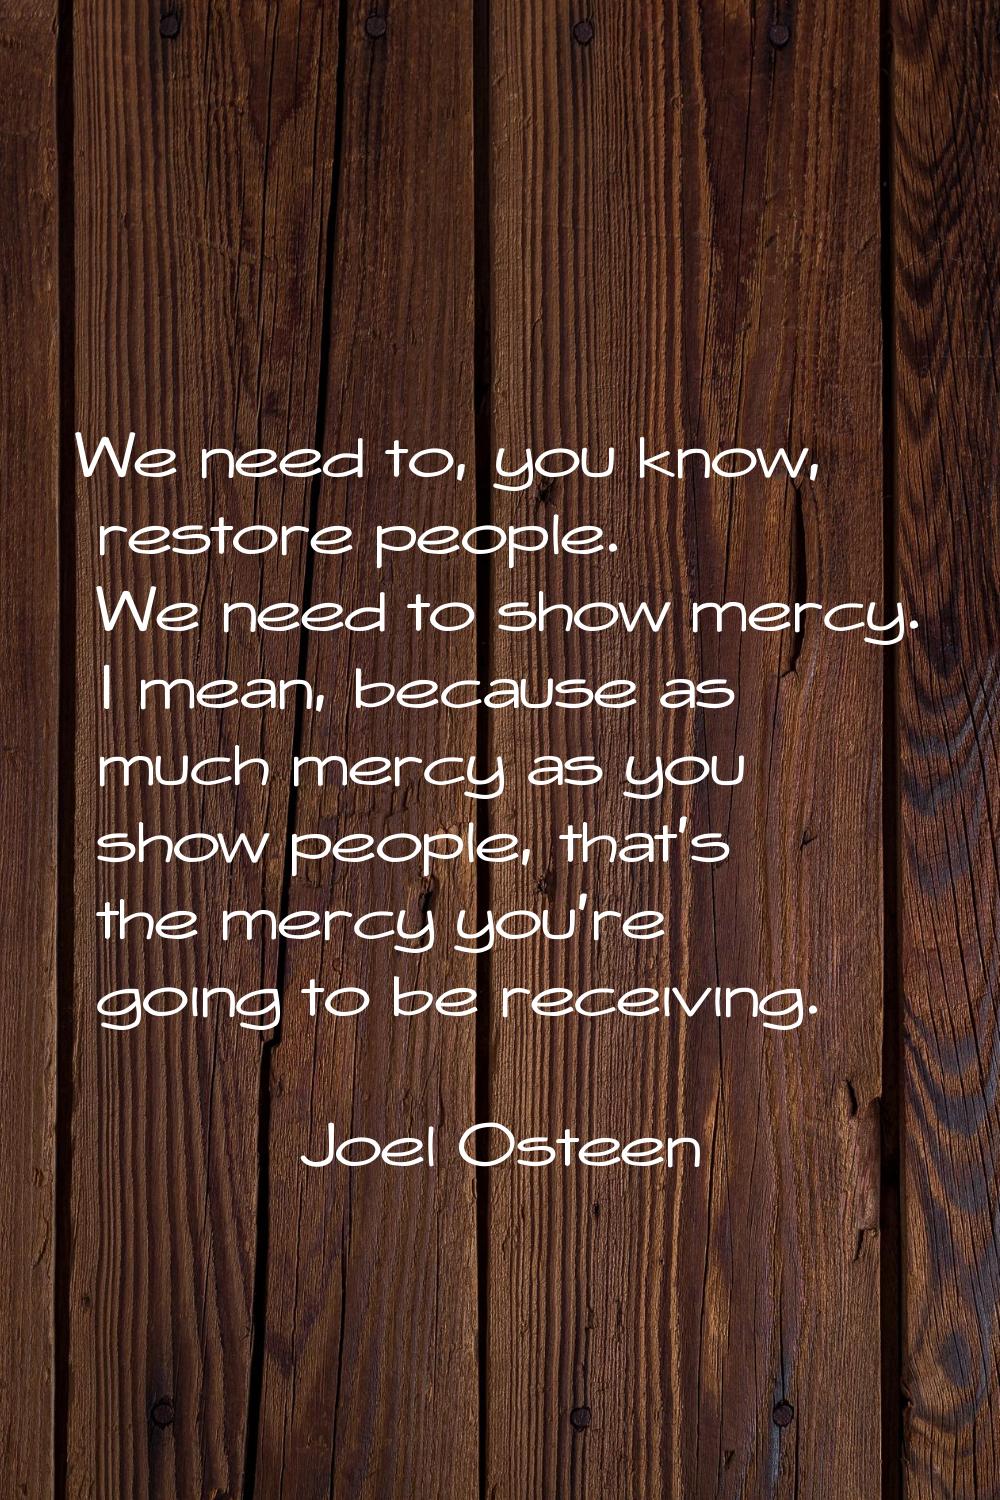 We need to, you know, restore people. We need to show mercy. I mean, because as much mercy as you s